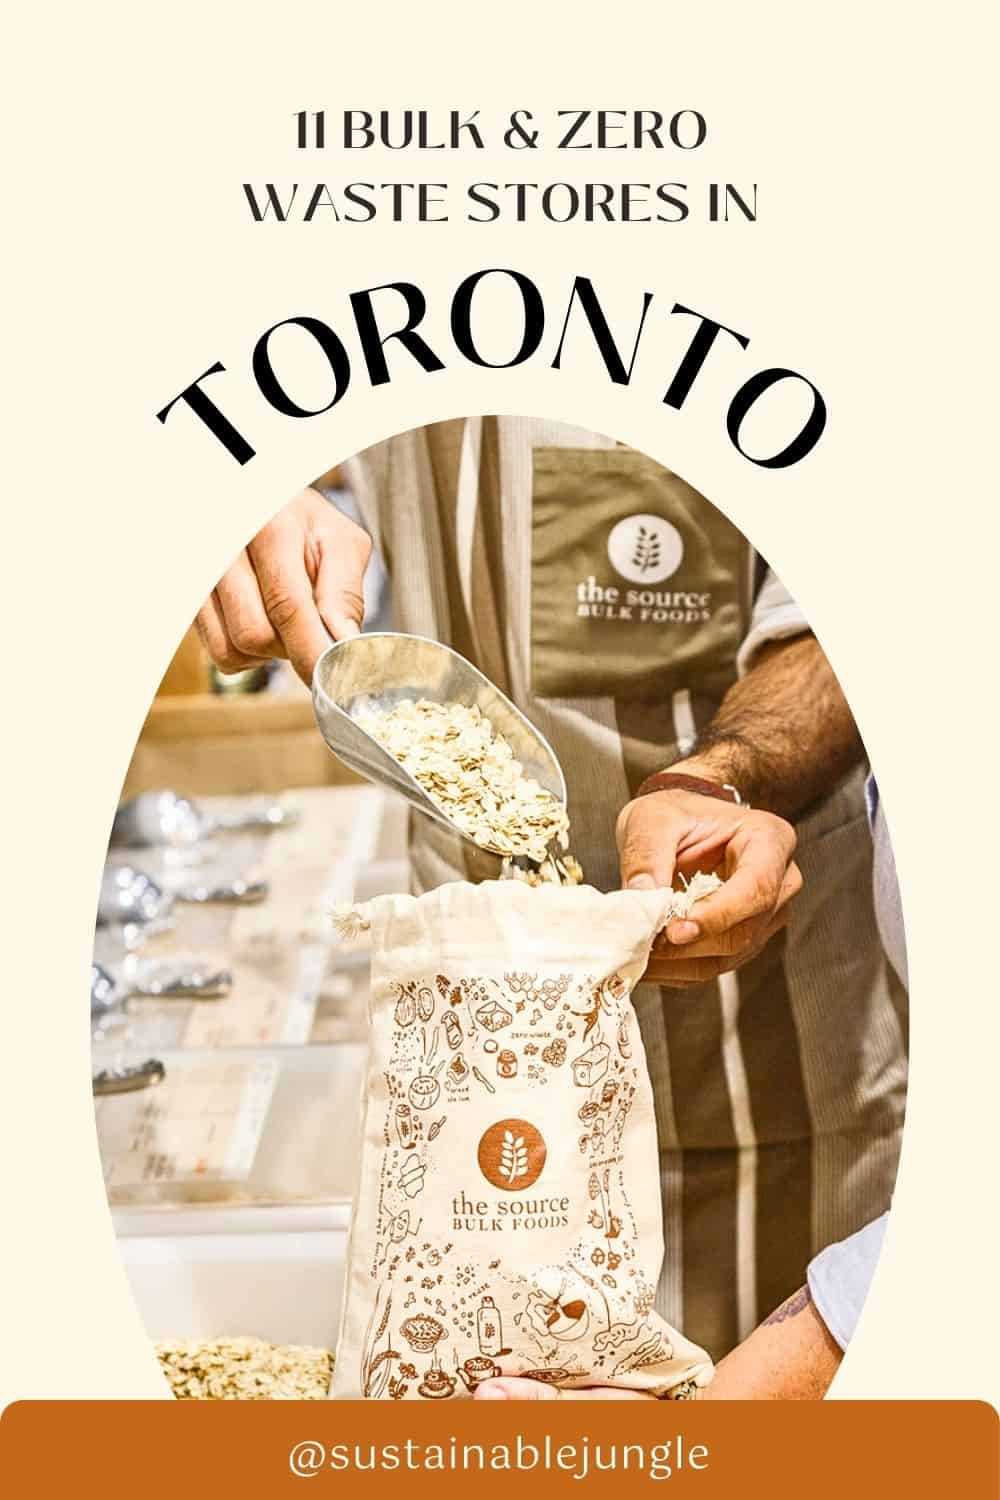 11 Bulk & Zero Waste Stores In Toronto For A More Sustainable 6ix Image by The Source Bulk Foods #zerowastestoreToronto #bestzerowastestoresToronto #bulkstoresToronto #refillstoreToronto #zerowasteshopping #sustainablejungle